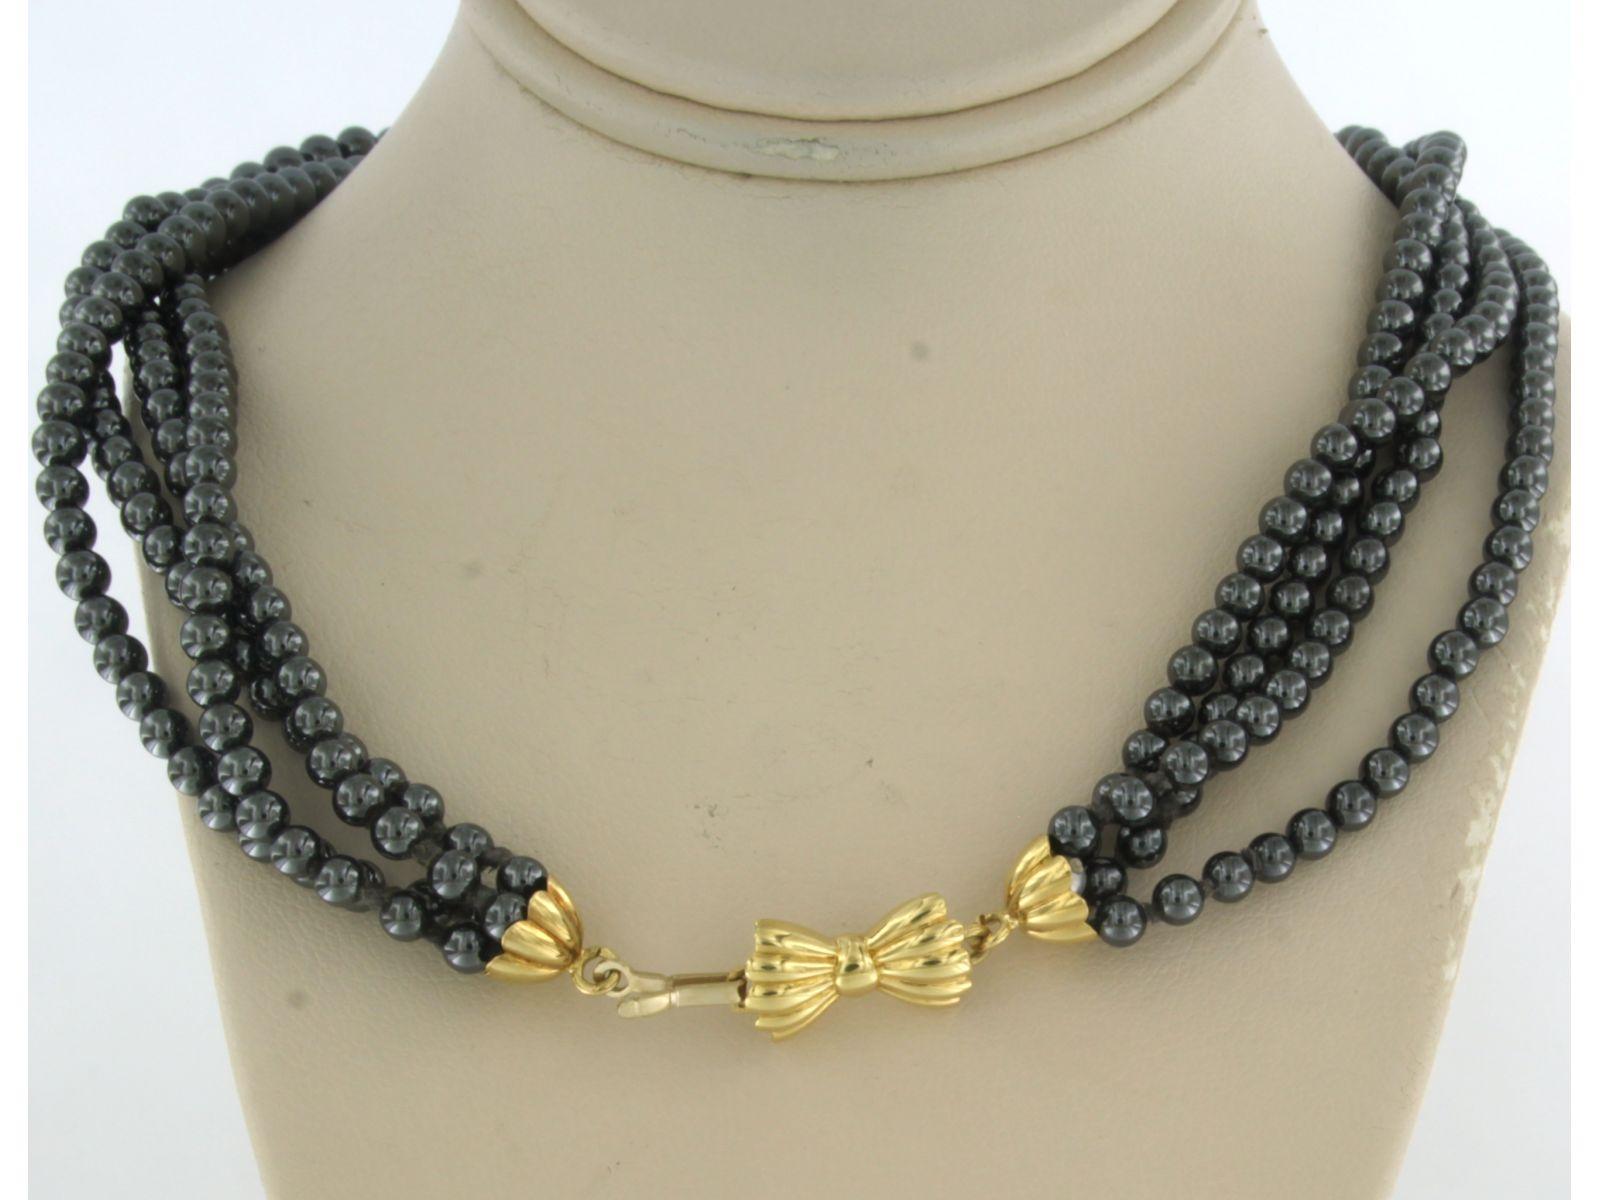 18k yellow gold clasp on a hematite bead necklace - 40 cm long For Sale 1